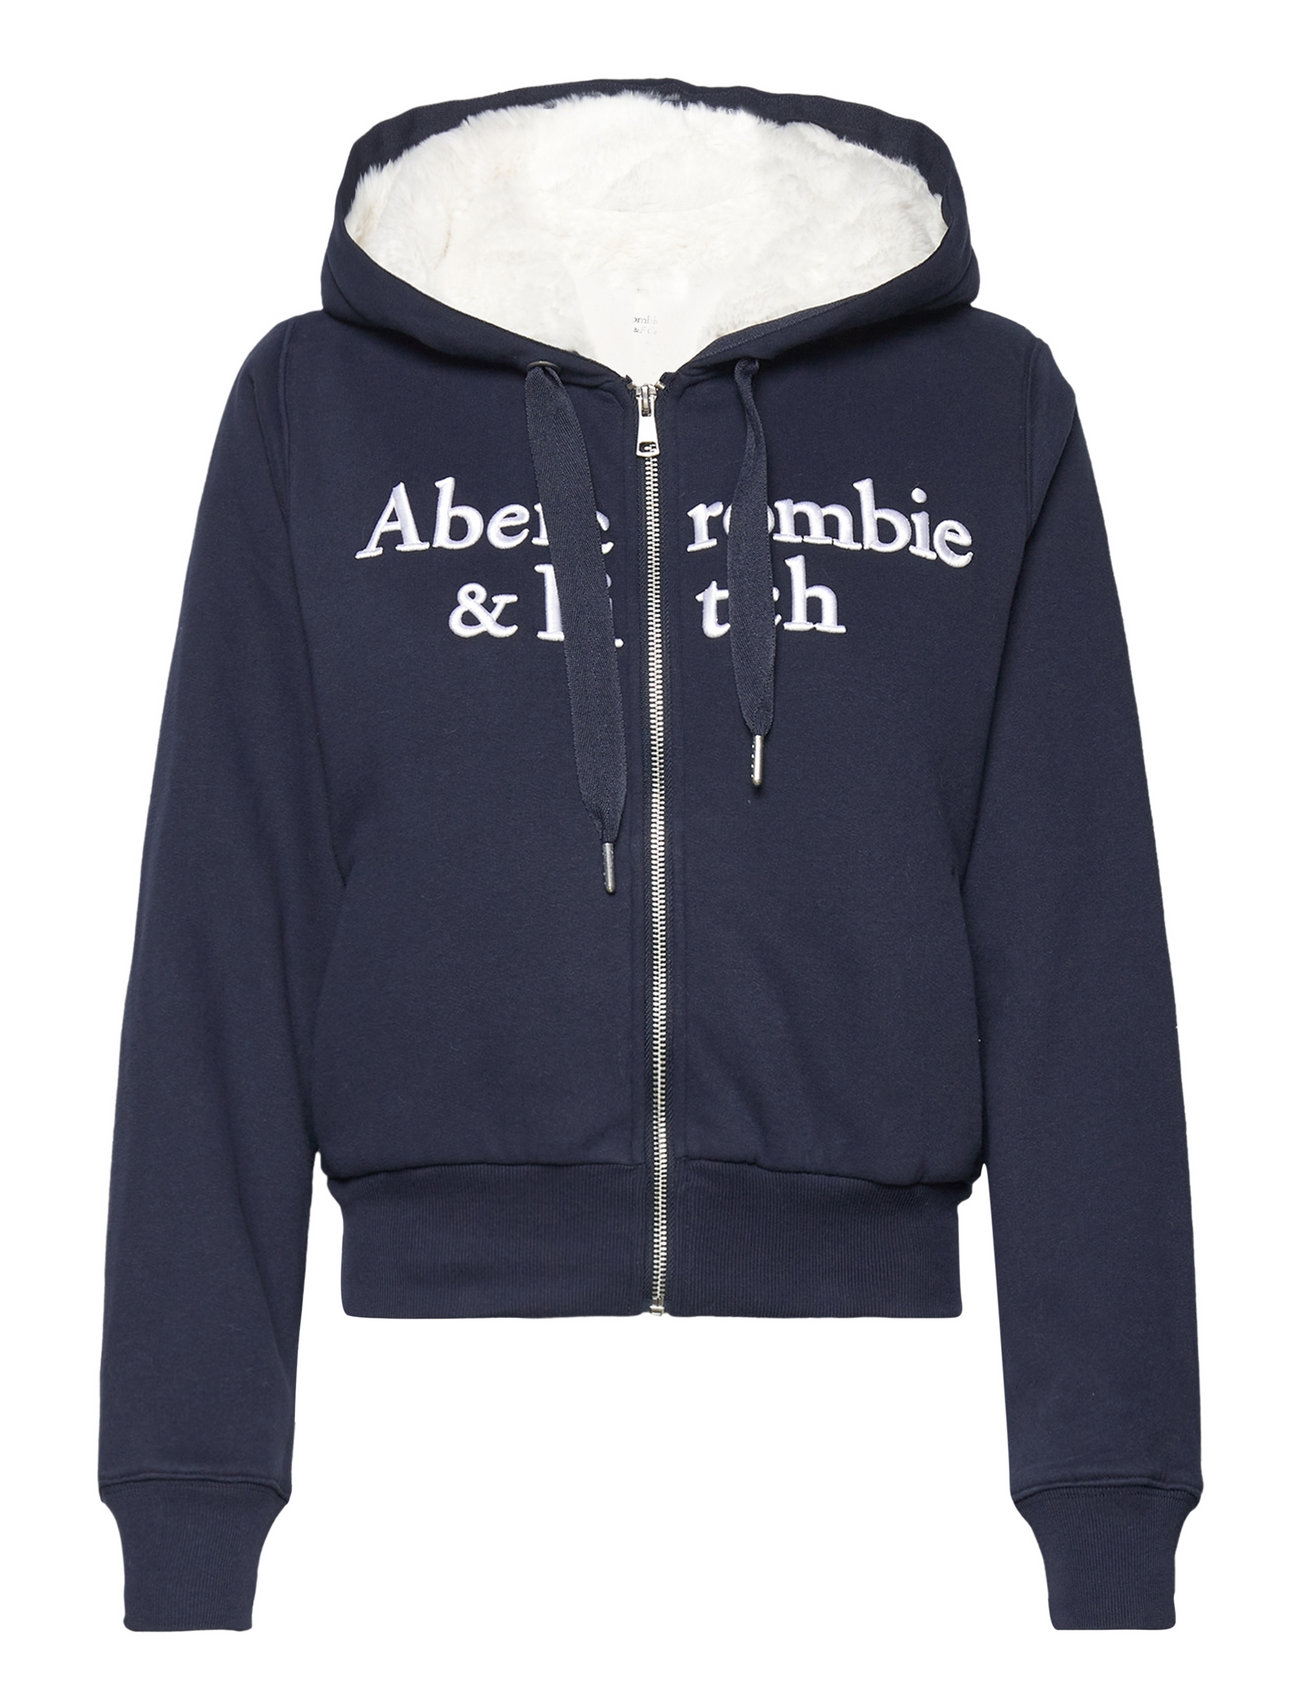 Anf Womens Sweatshirts Hoodie Navy Abercrombie & Fitch